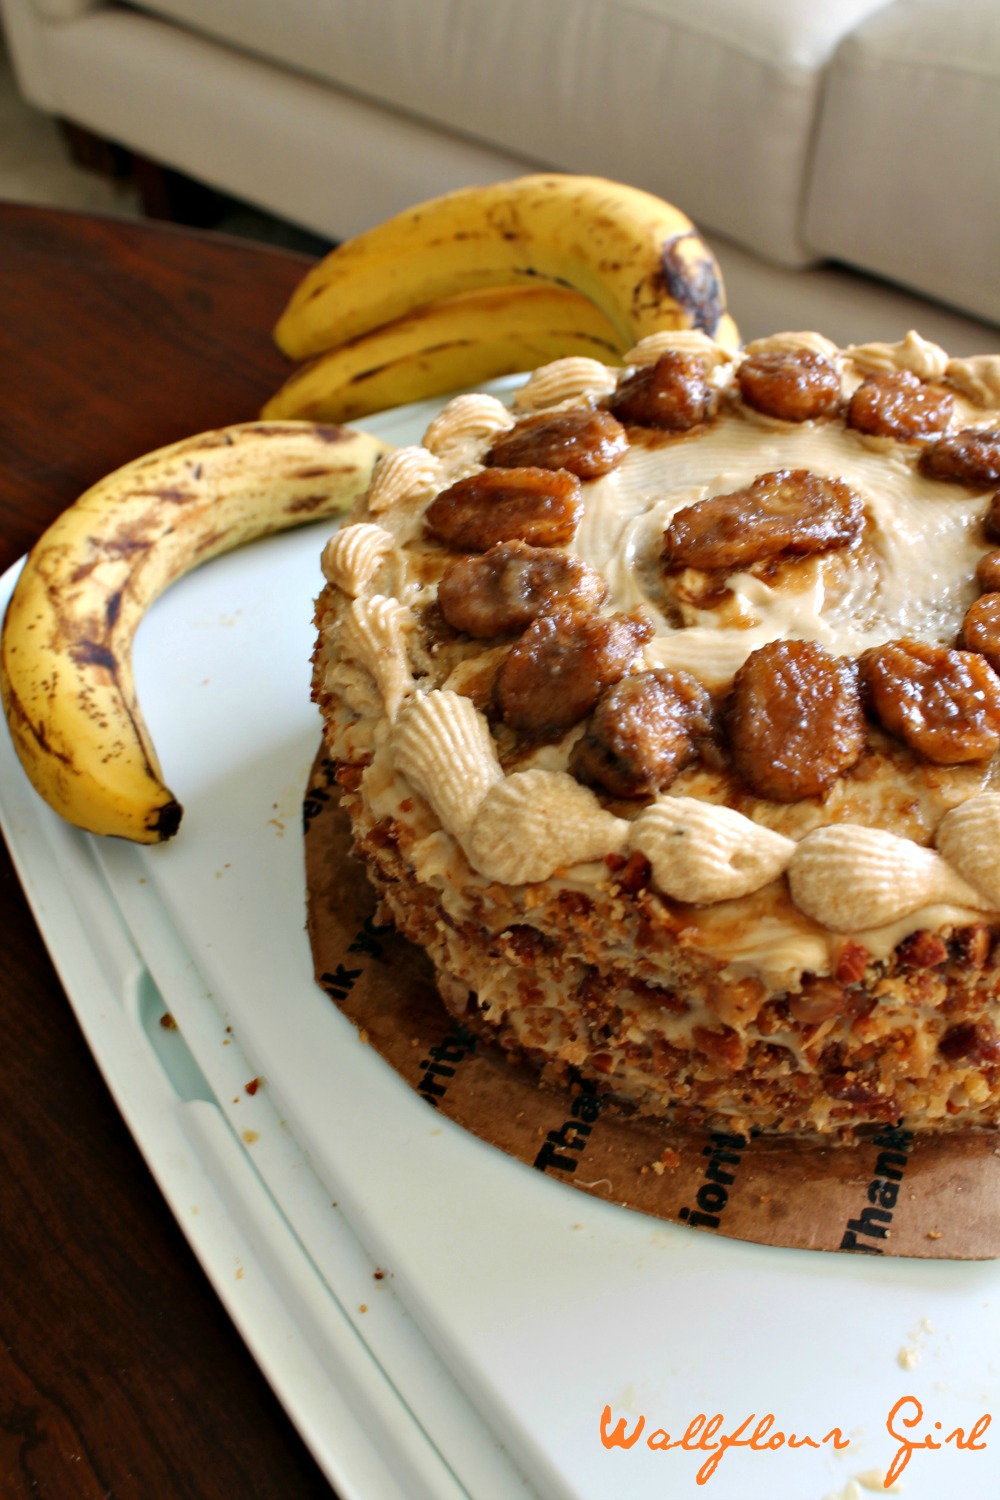 The Best Bananas Foster Toffee Coffee Crunch Cake - Wallflour Girl